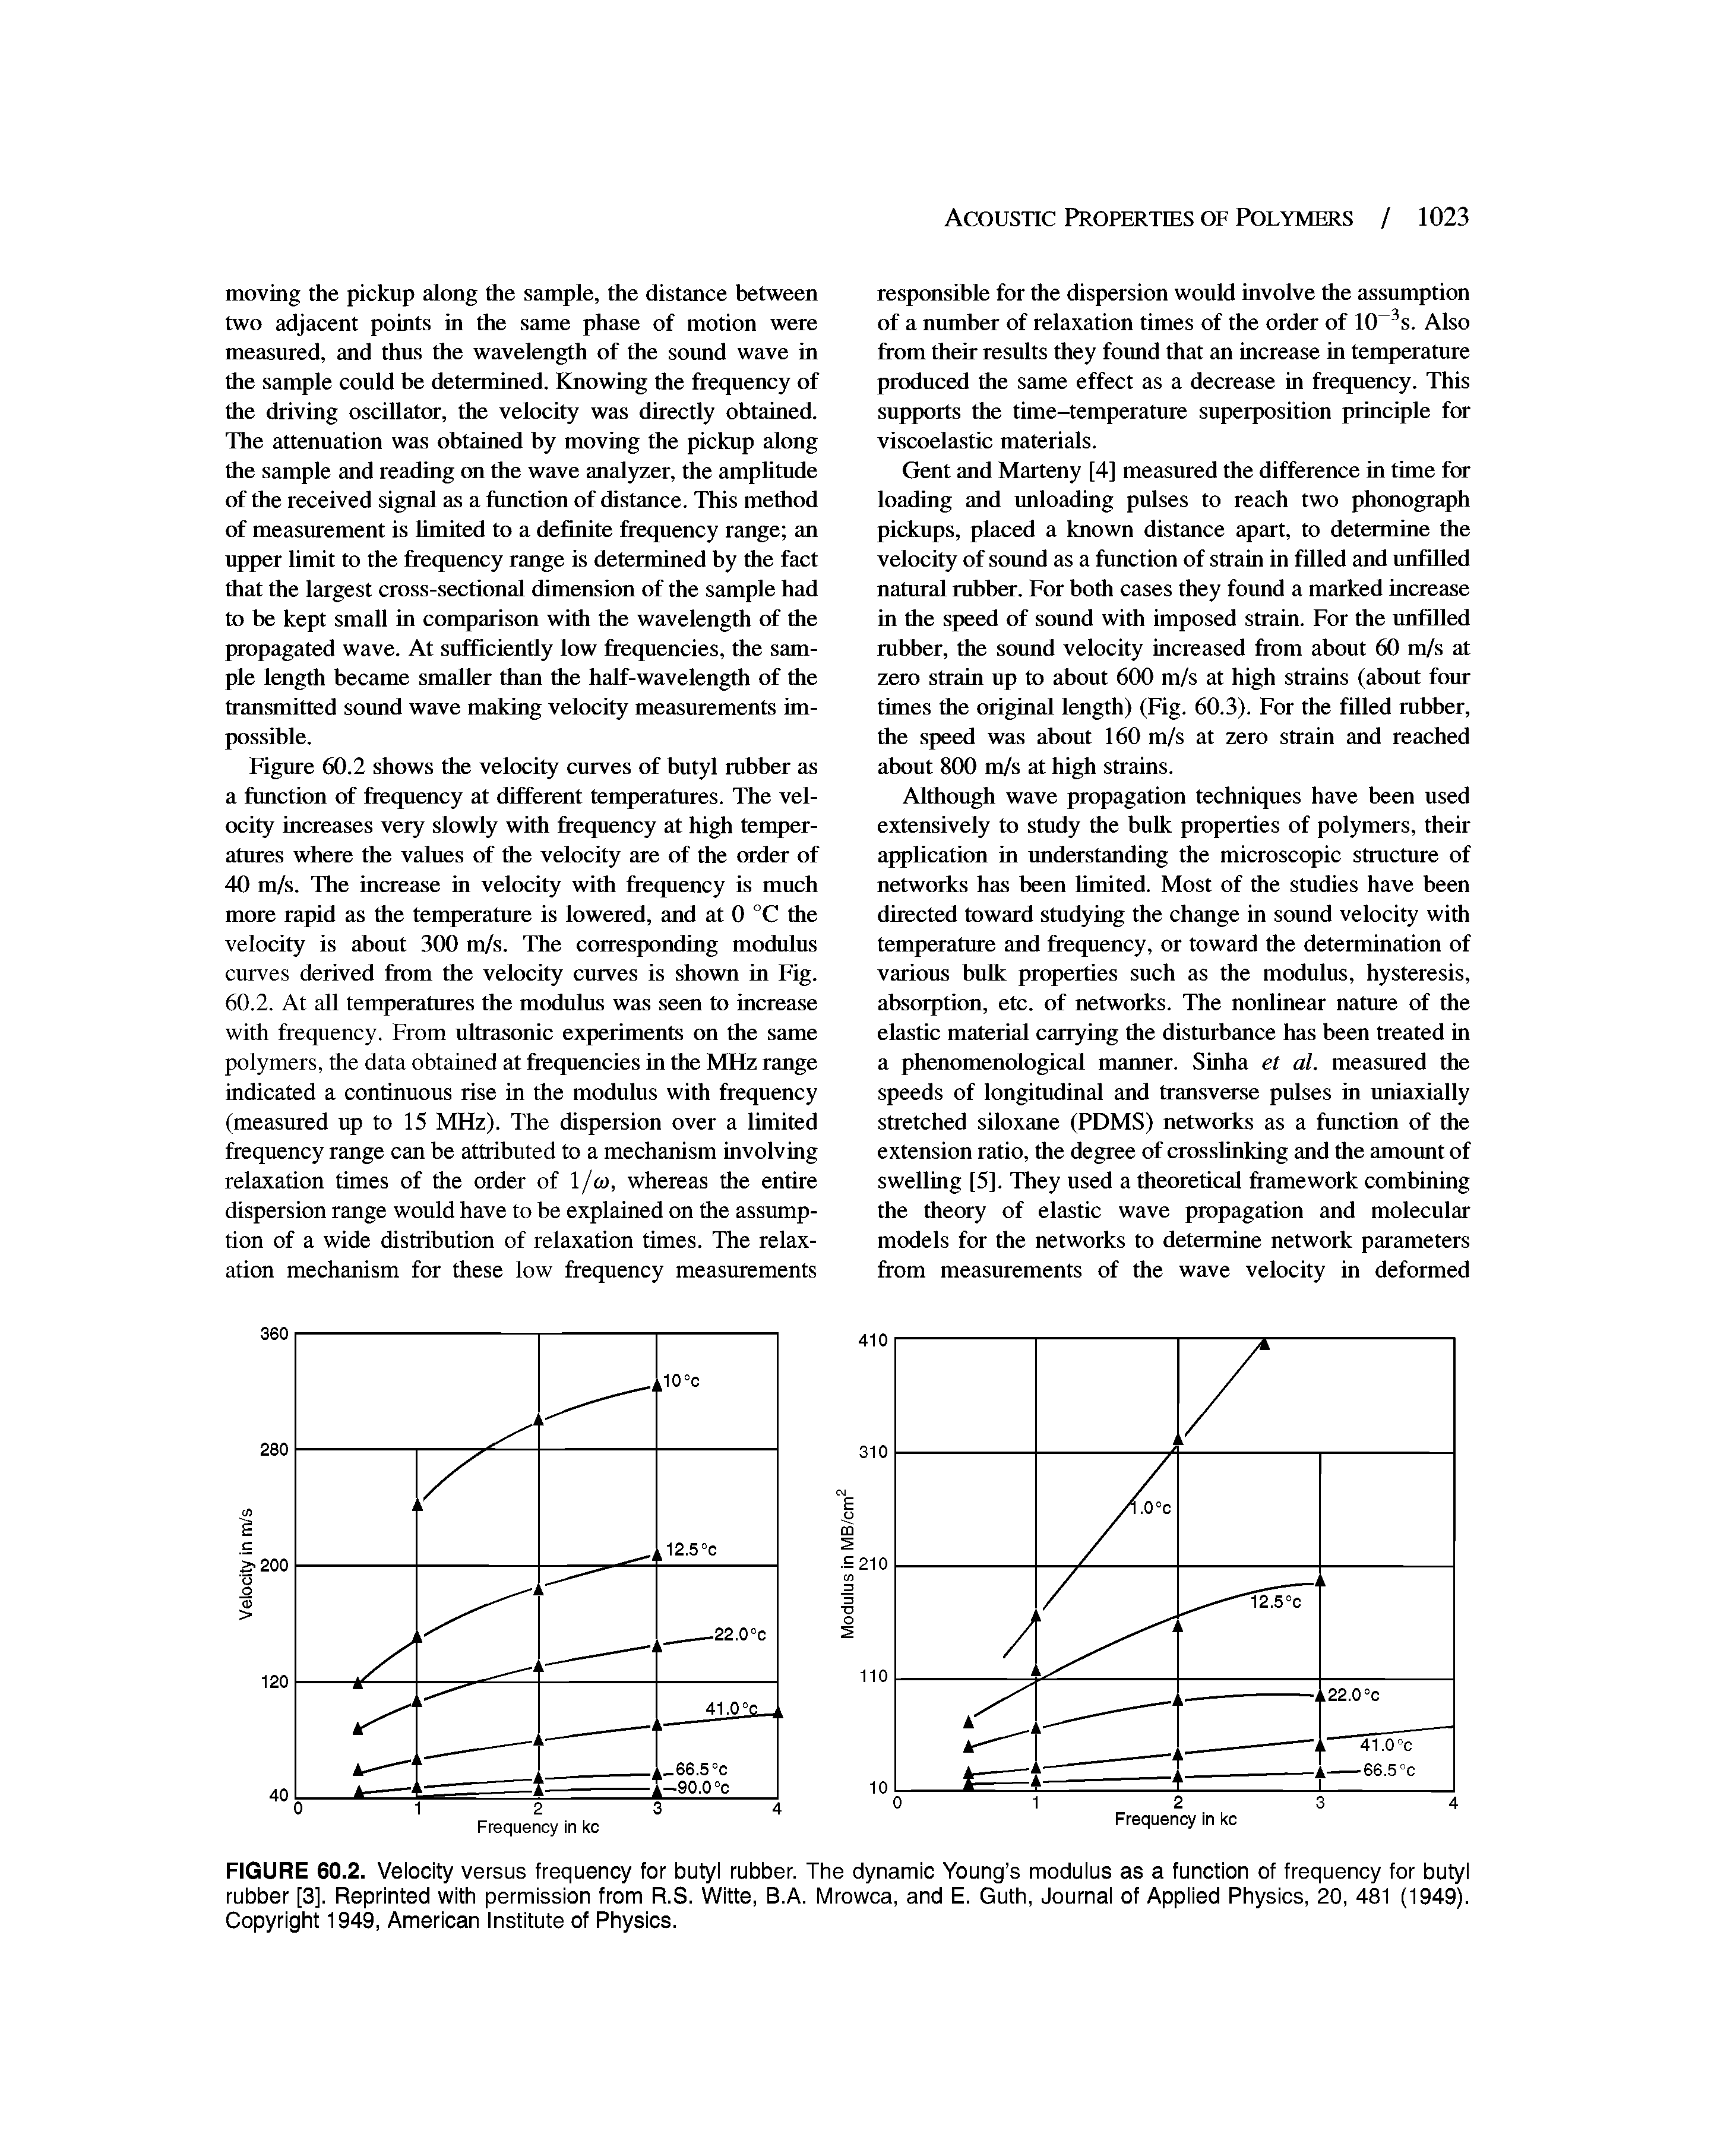 Figure 60.2 shows the velocity curves of butyl rubber as a function of frequency at different temperatures. The velocity increases very slowly with frequency at high temperatures where the values of the velocity are of the order of 40 m/s. The increase in velocity with frequency is much more rapid as the temperature is lowered, and at 0 °C the velocity is about 300 m/s. The corresponding modulus curves derived from the velocity curves is shown in Fig. 60.2. At all temperatures the modulus was seen to increase with frequency. From ultrasonic experiments on the same polymers, the data obtained at frequencies in the MHz range indicated a continuous rise in the modulus with frequency (measured up to 15 MHz). The dispersion over a limited frequency range can be attributed to a mechanism involving relaxation times of the order of l/w, whereas the entire dispersion range would have to be explained on the assumption of a wide distribution of relaxation times. The relaxation mechanism for these low frequency measurements...